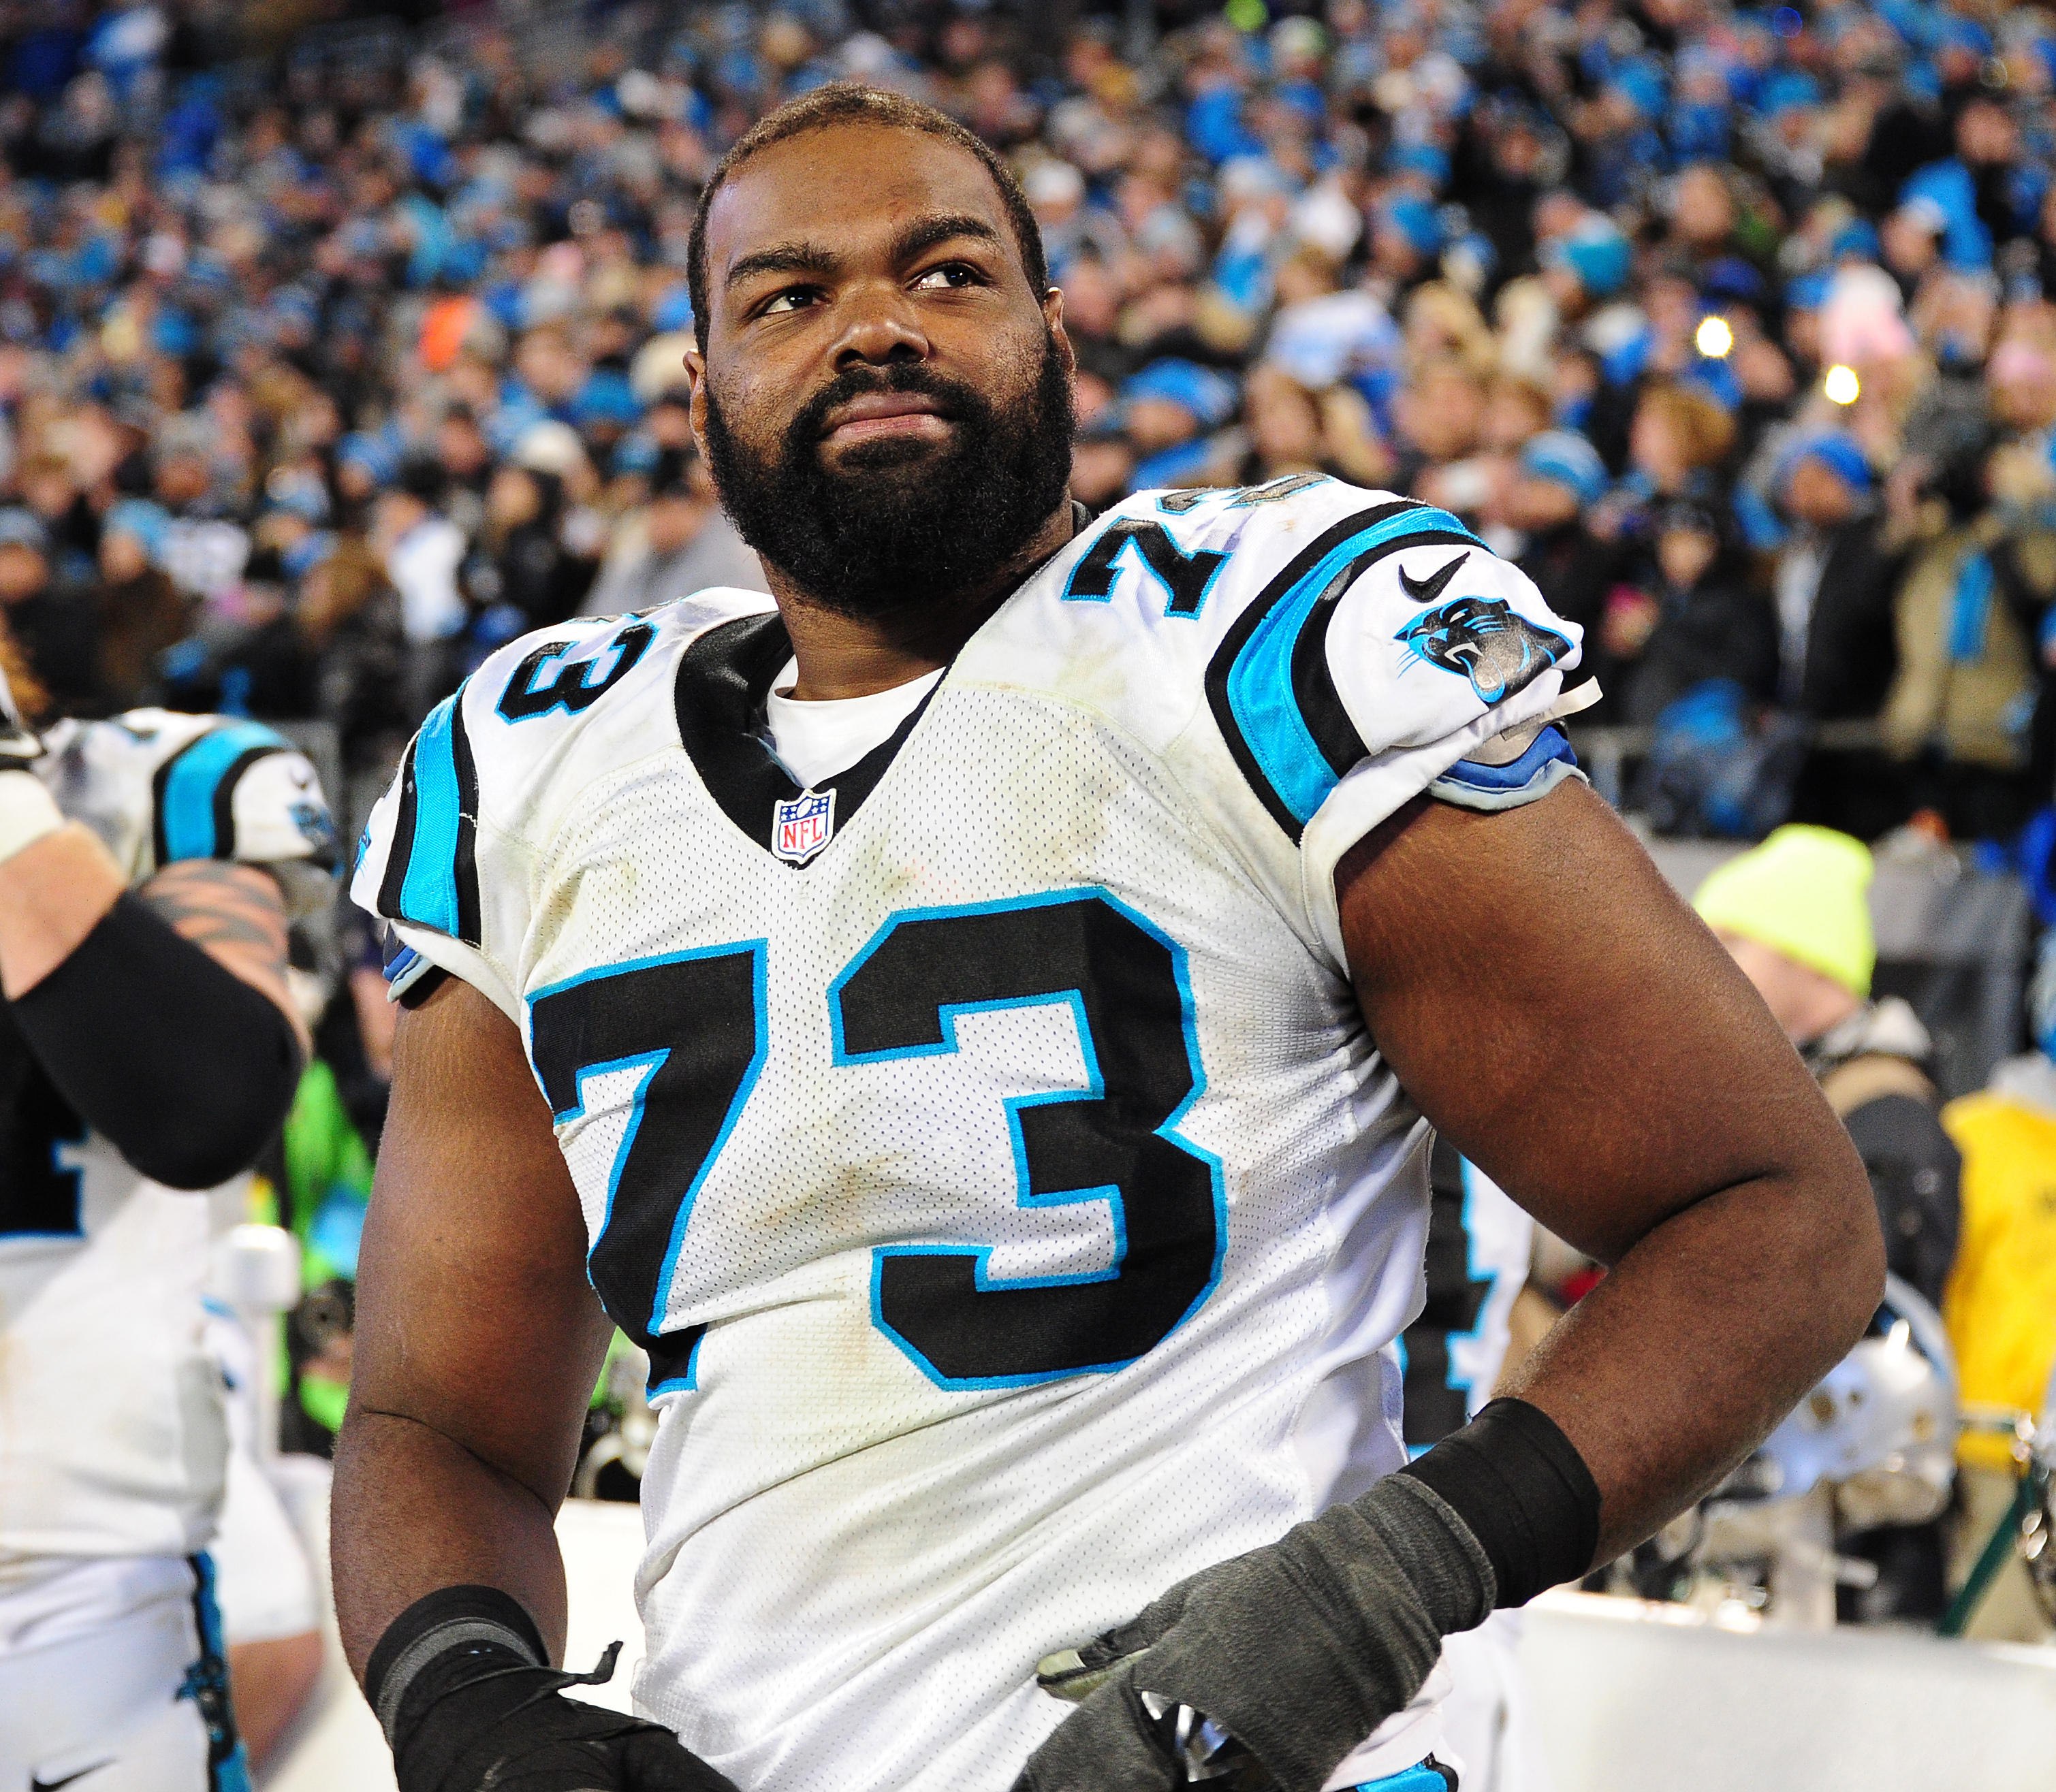 Michael Oher on the sideline of a football game